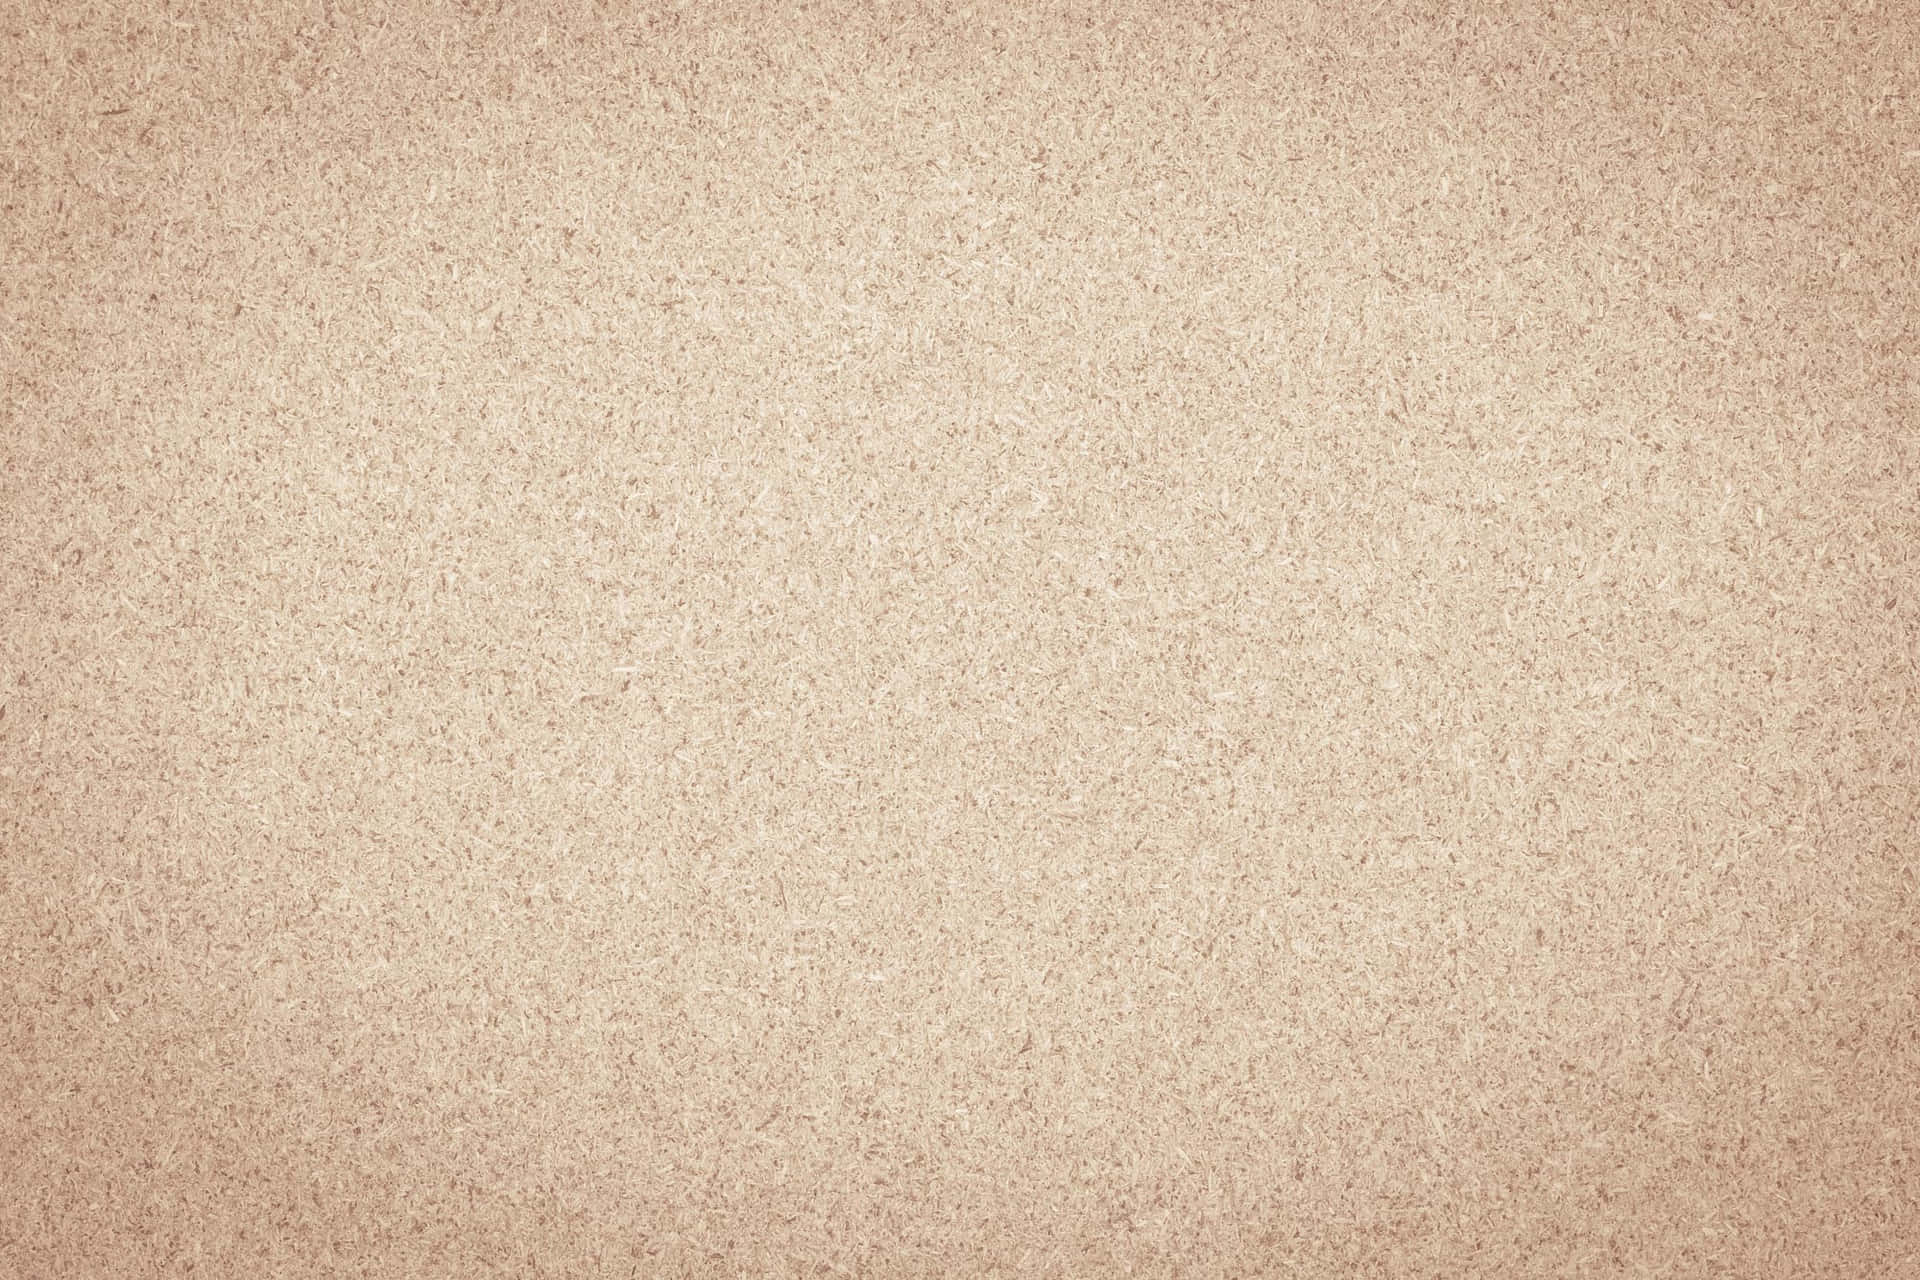 A Beige Paper Background With A Texture